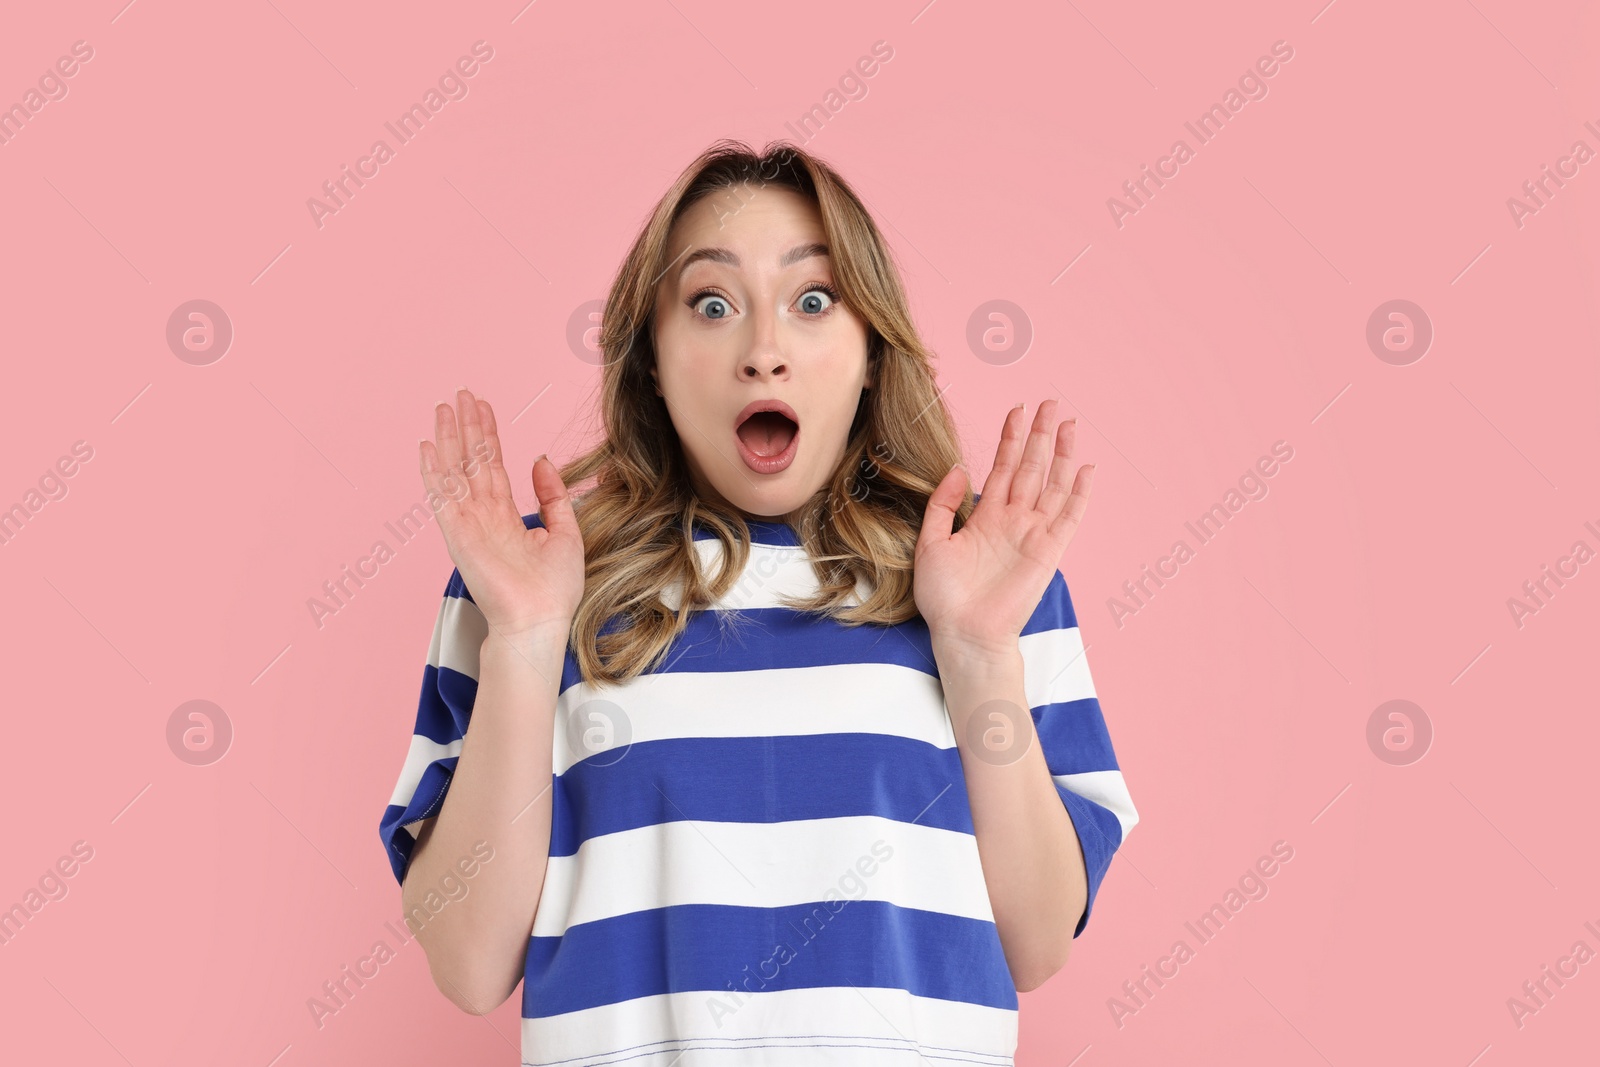 Photo of Portrait of surprised woman on pink background